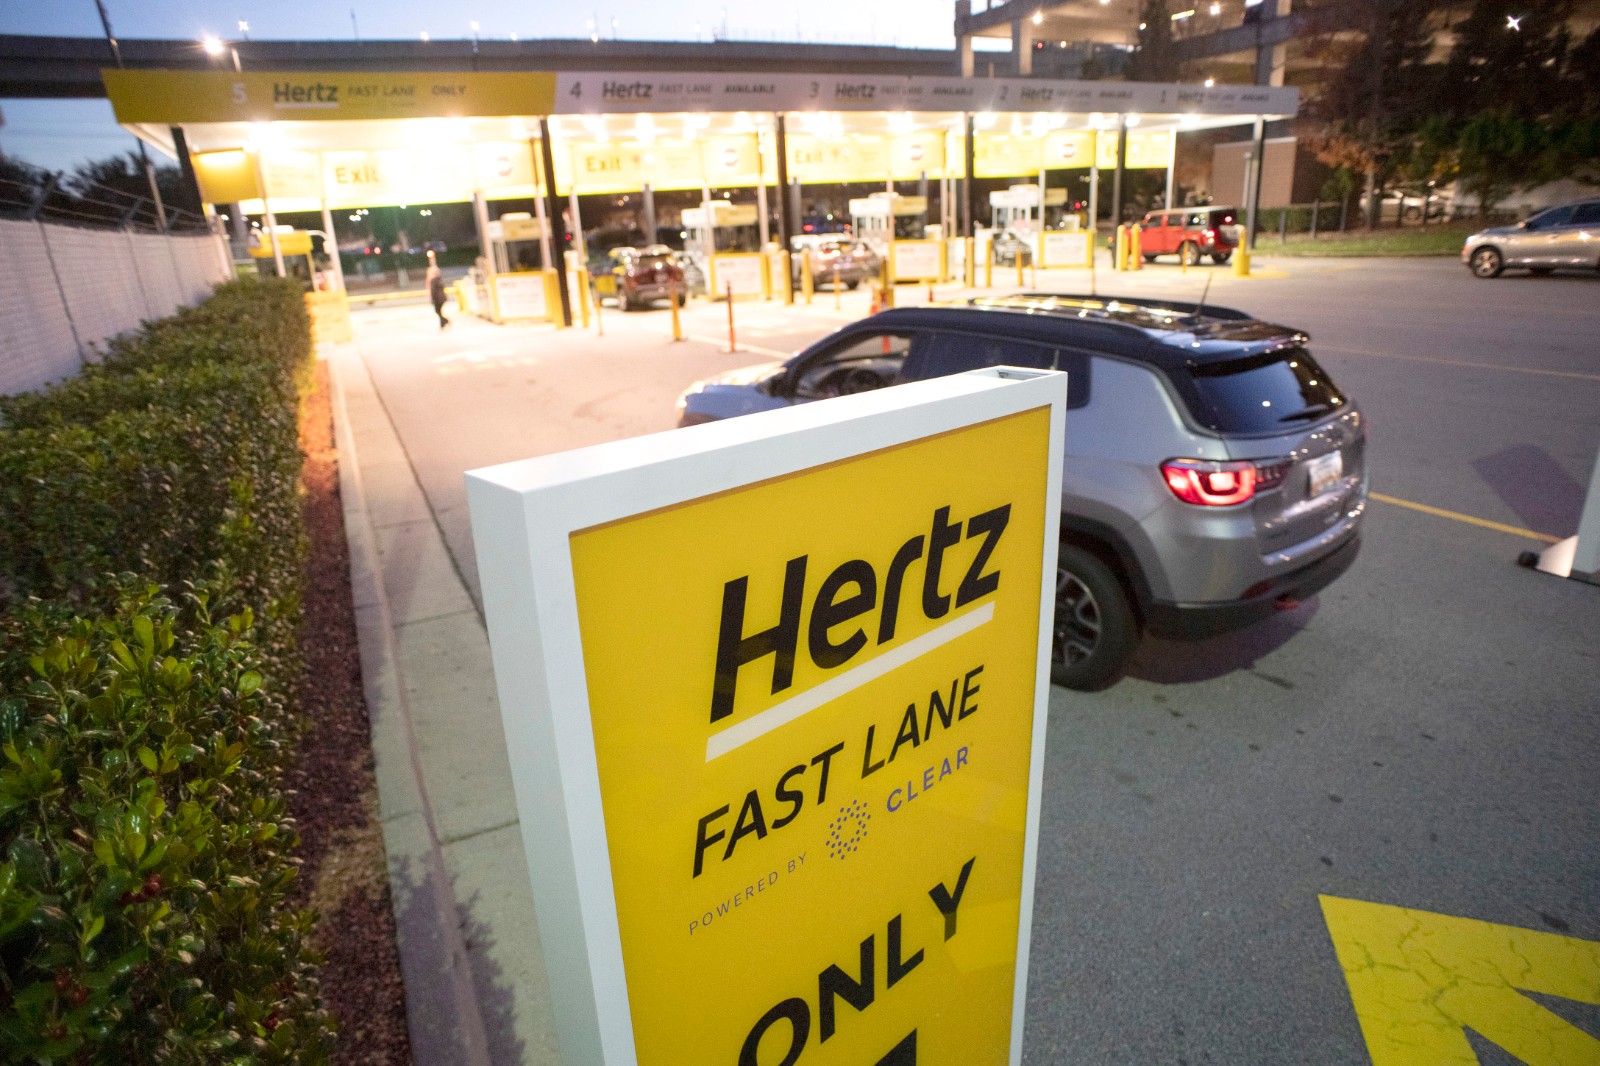 IMAGE DISTRIBUTED FOR HERTZ FAST LANE POWERED BY CLEAR - On Tuesday, Dec. 11, 2018 Hertz and CLEAR announced the Hertz Fast Lane powered by CLEAR, a new service that uses biometrics, allowing travelers to get through the exit gate and on the road in 30 seconds or less with just a look or tap of their finger. It is now available at the Hartsfield-Jackson Atlanta International Airport (ATL), with 40 more locations expected in 2019. (John Amis/AP Images for Hertz Fast Lane powered by CLEAR)